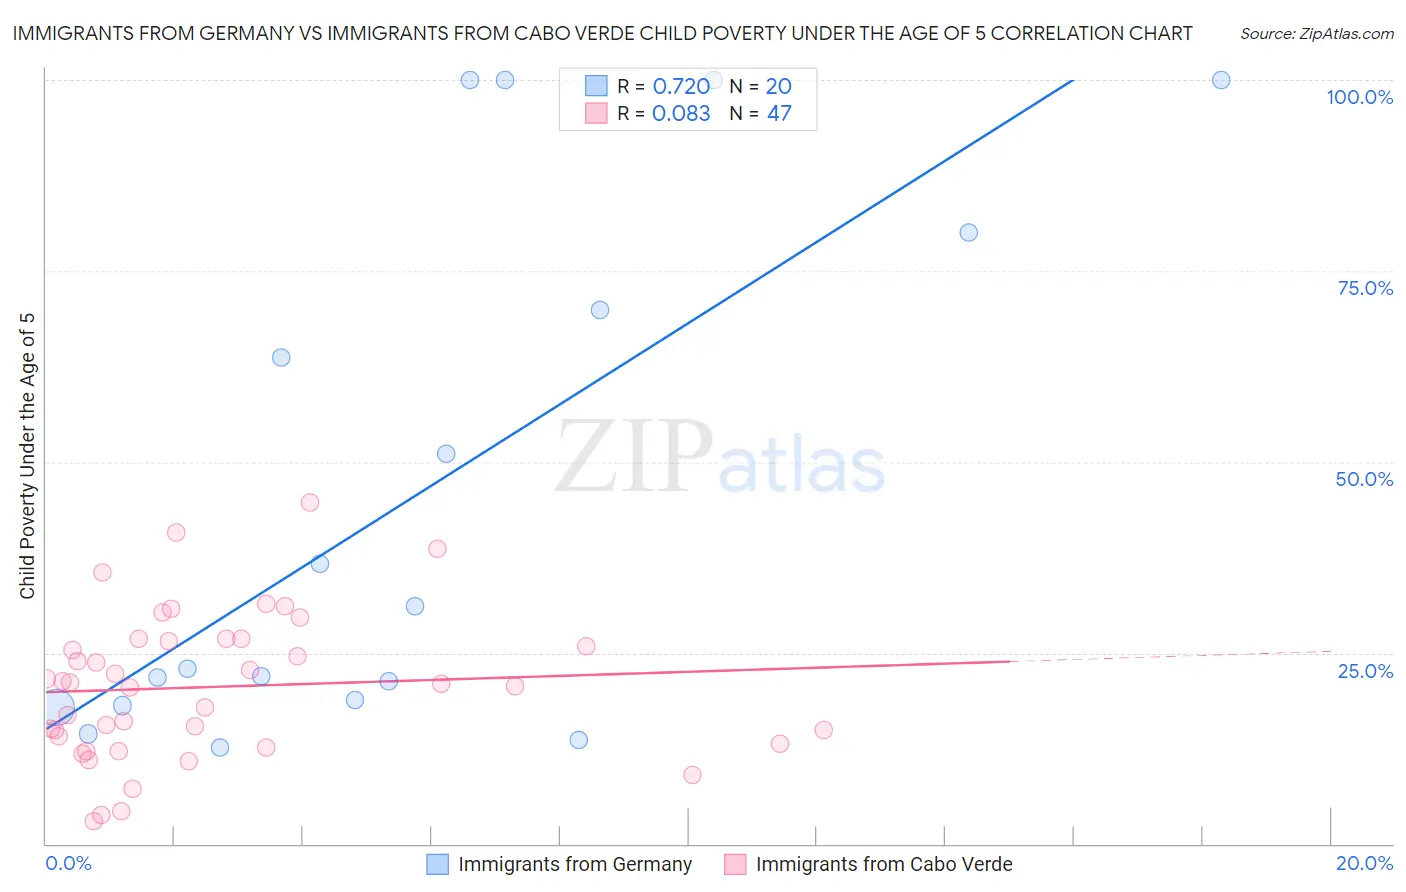 Immigrants from Germany vs Immigrants from Cabo Verde Child Poverty Under the Age of 5